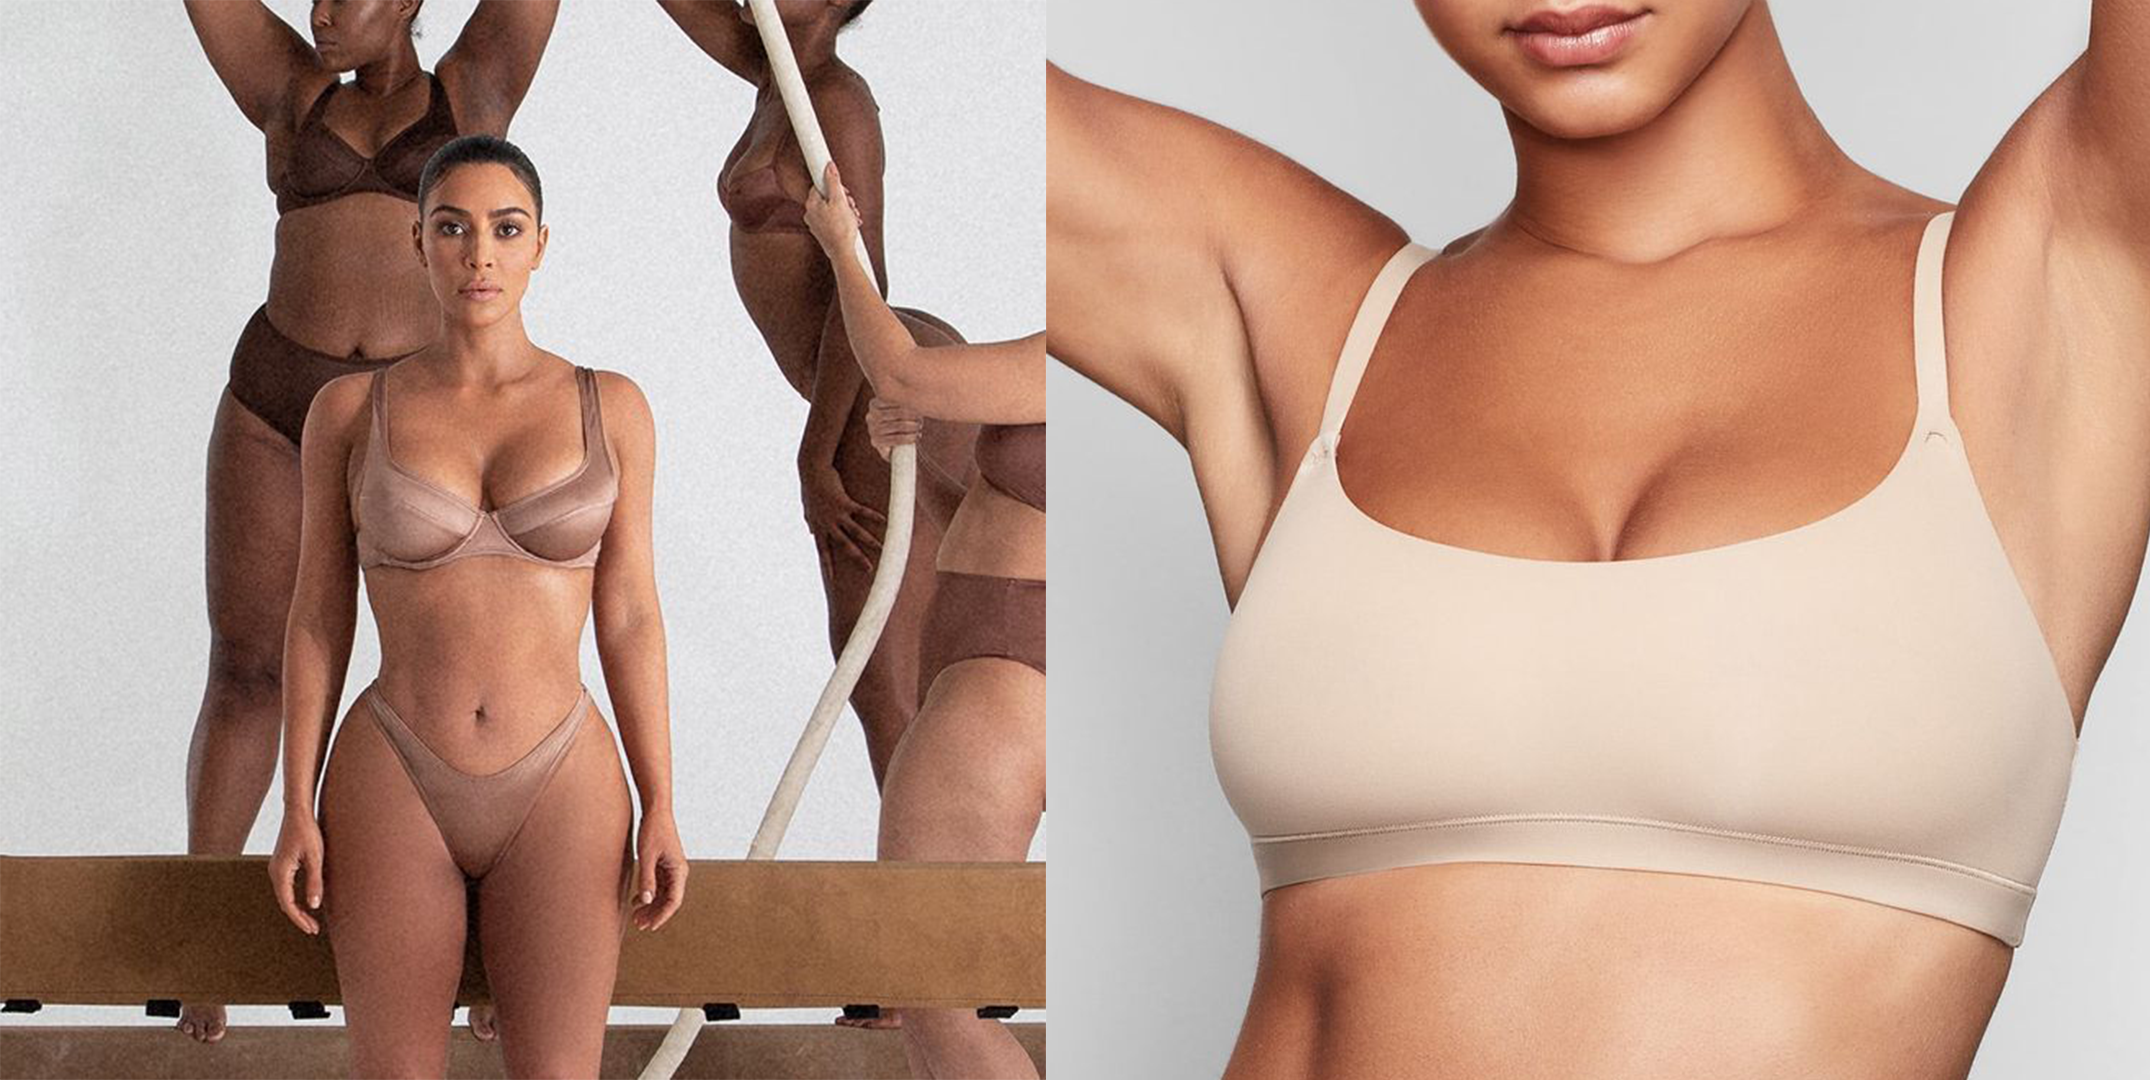 Re: my original post about the Skims sculpting bralettes for those